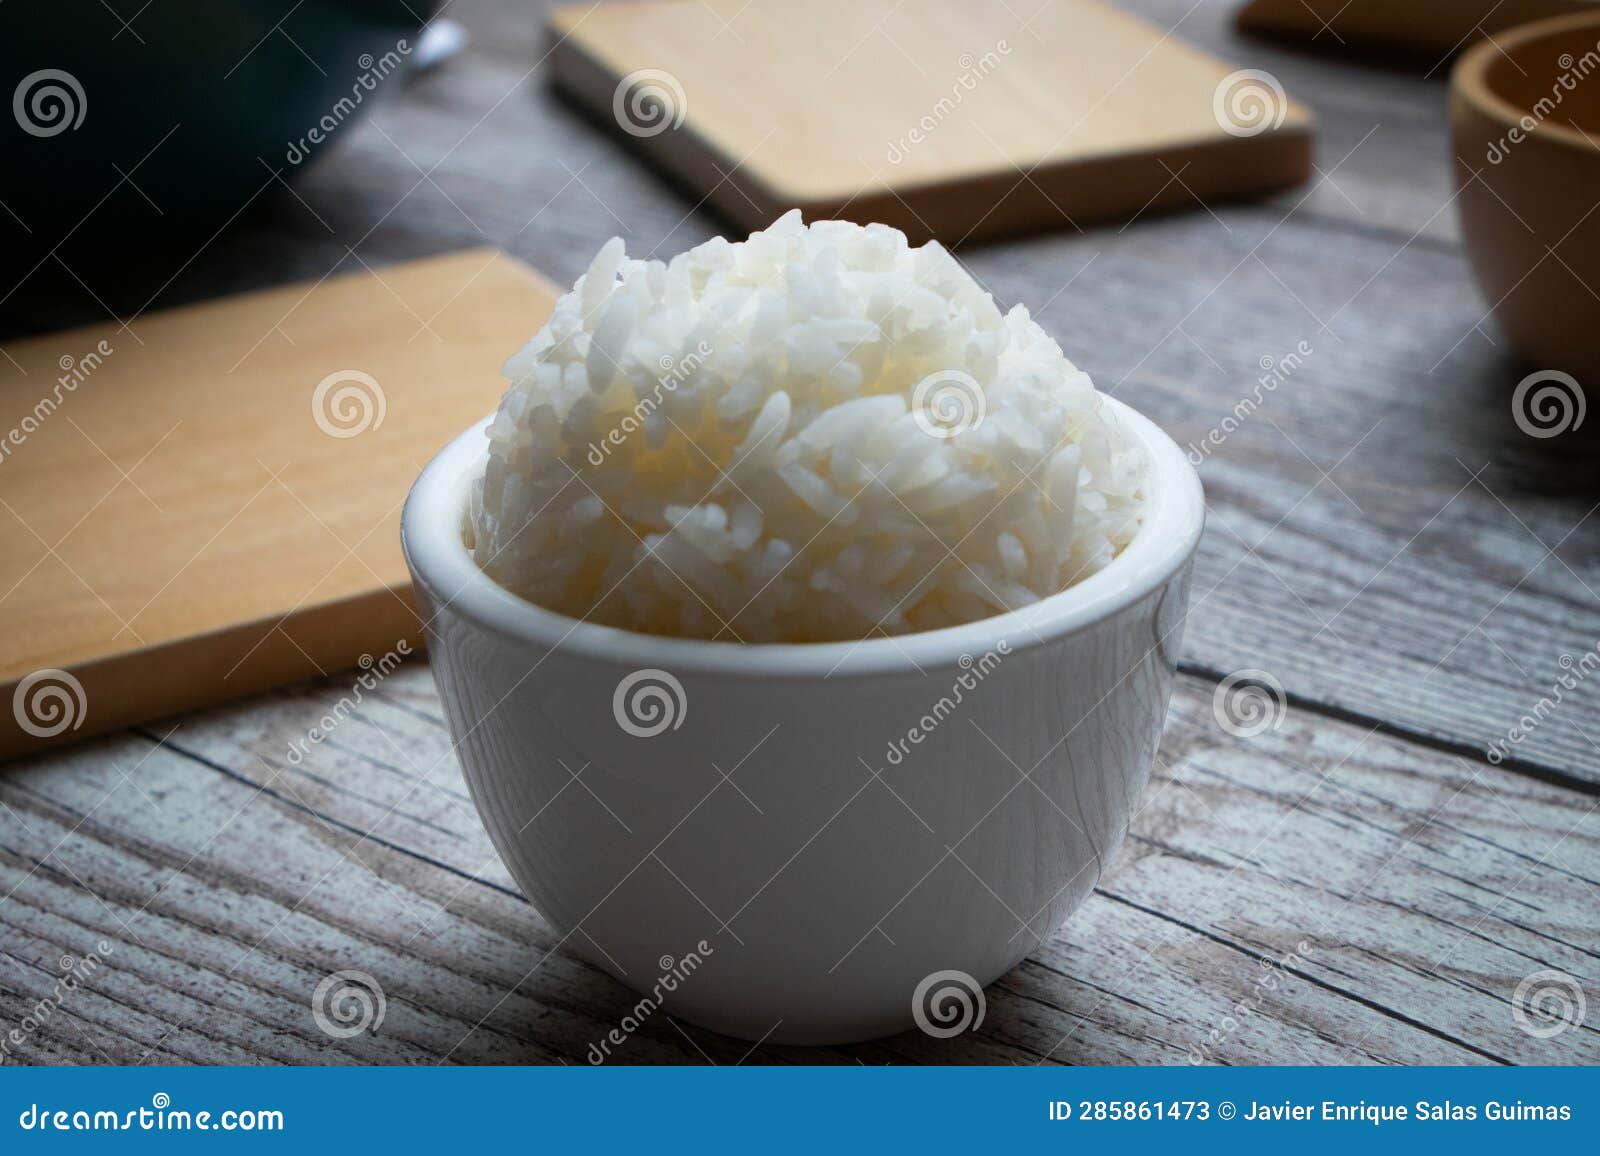 small white bowl with white rice.